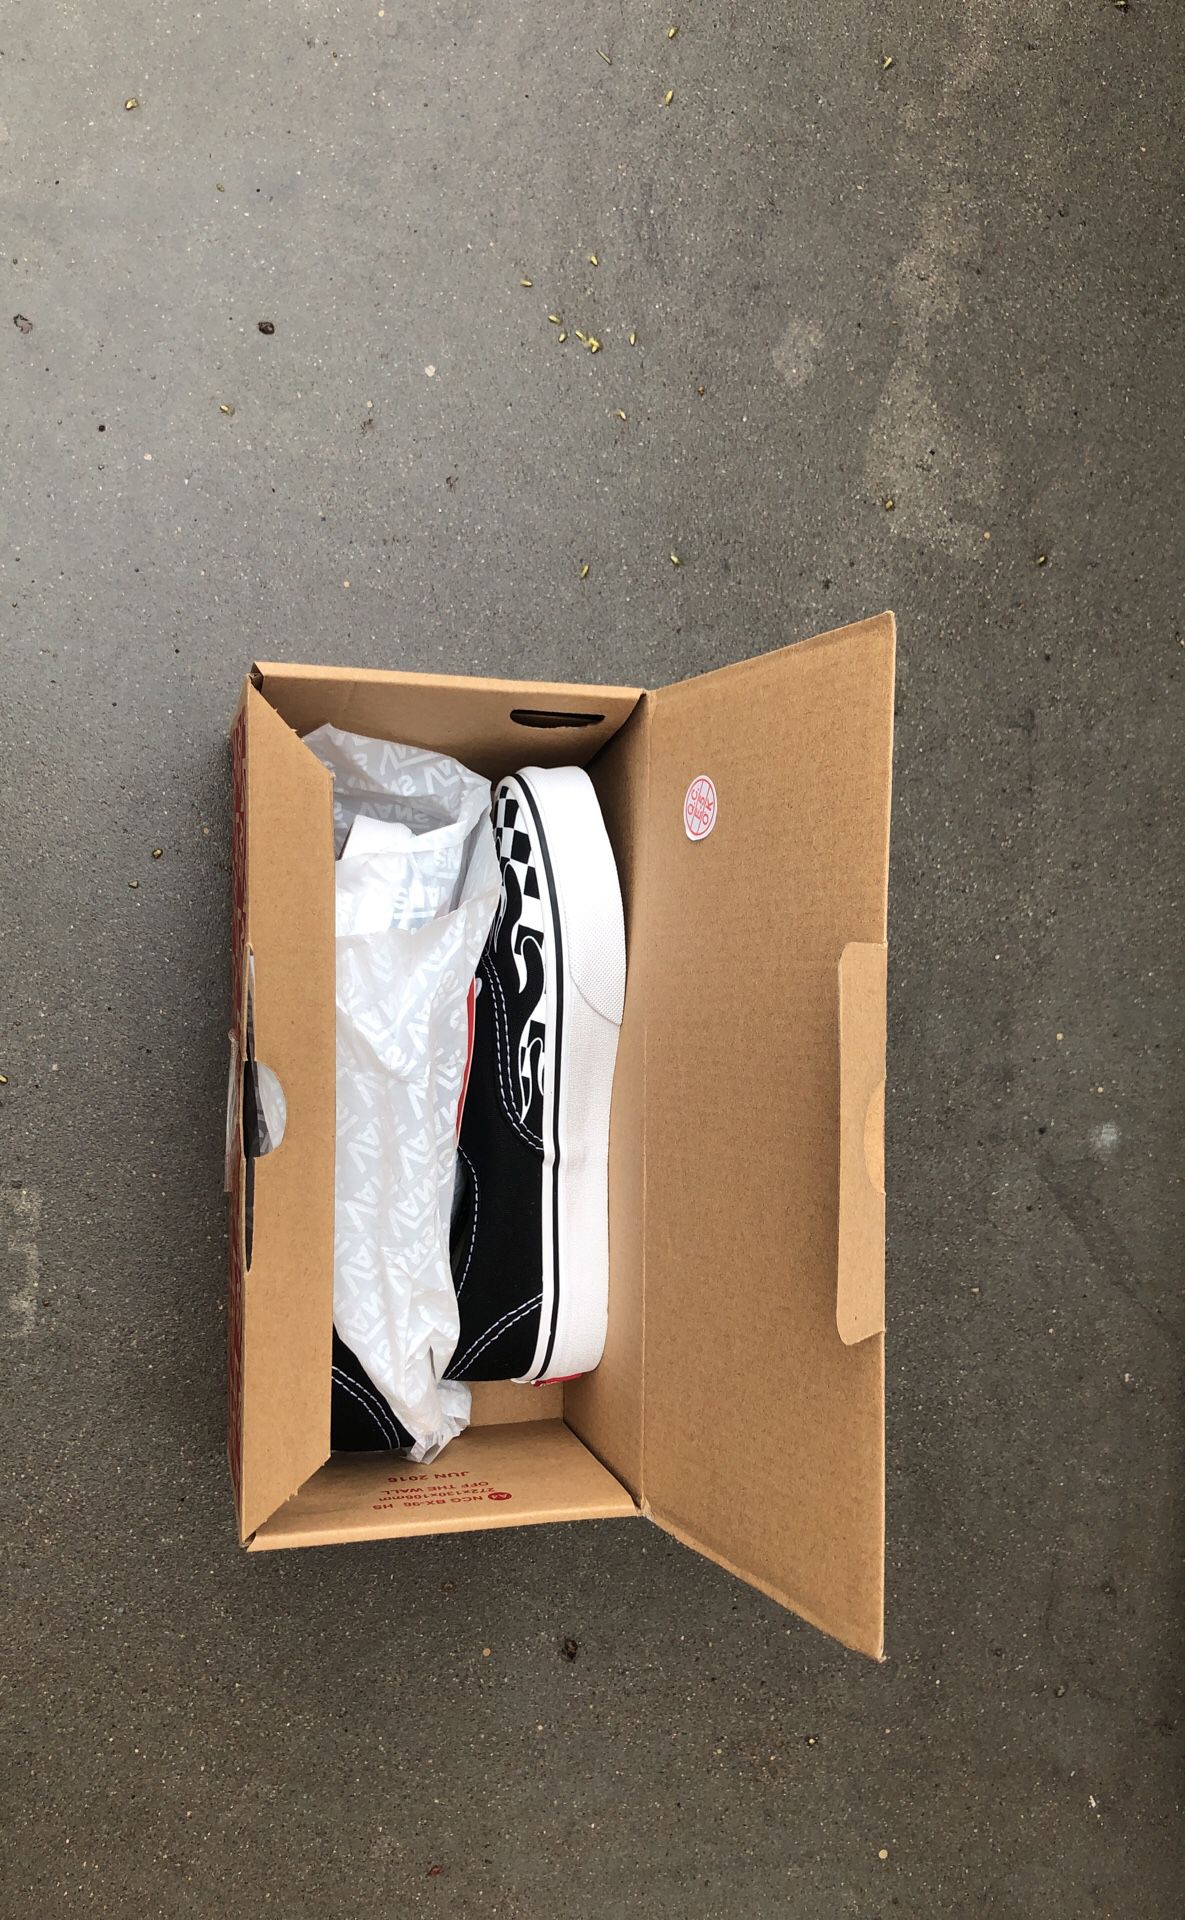 Size 2 Vans for sale NEW